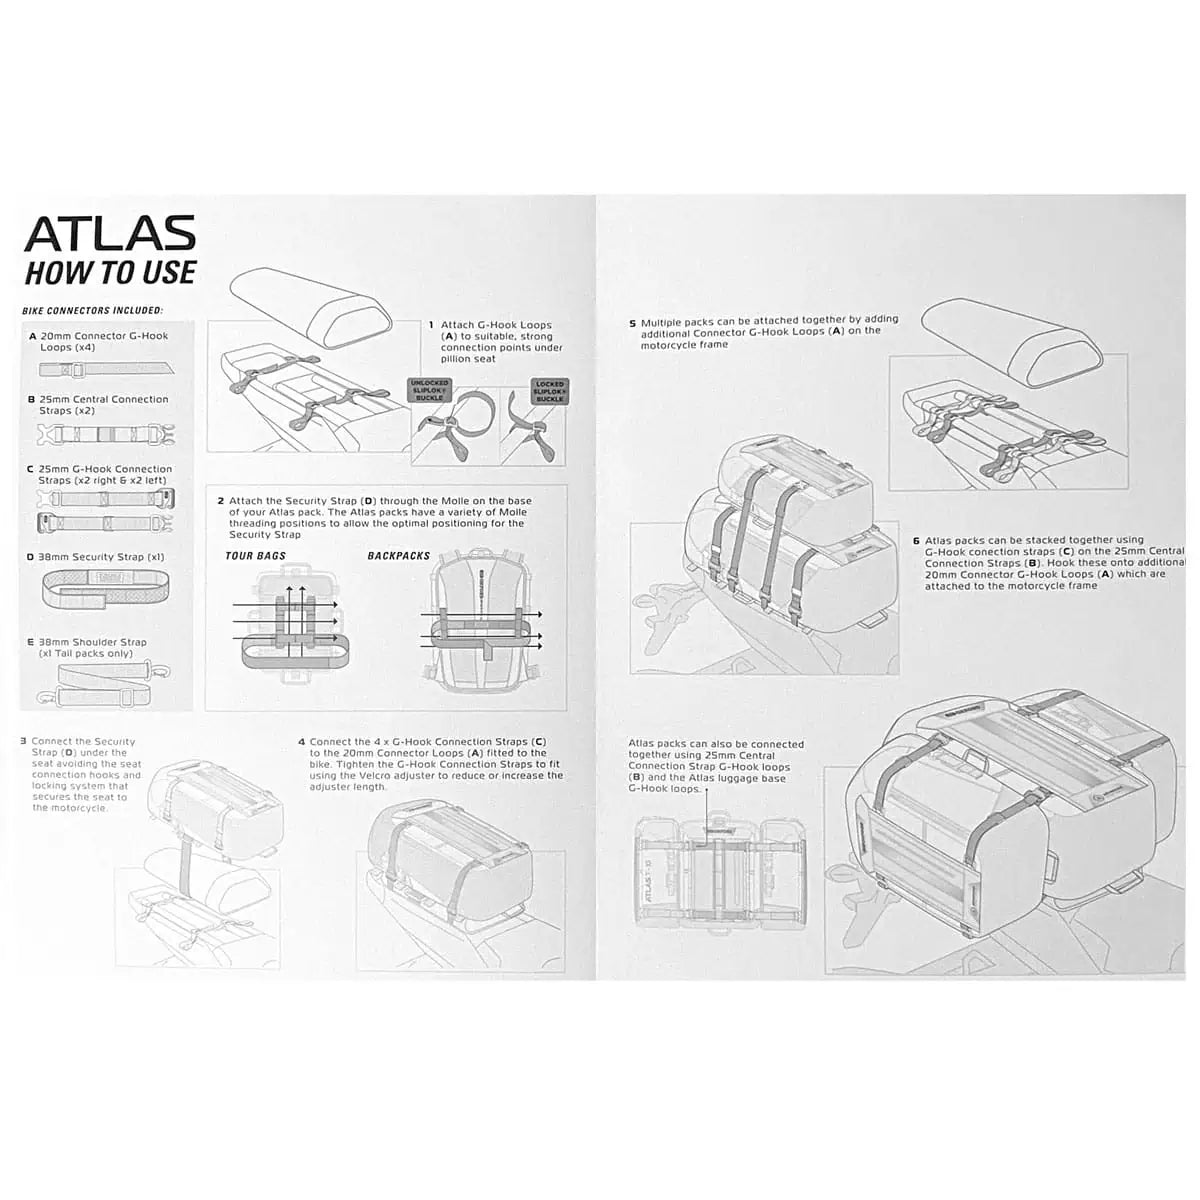 Oxford Atlas T-10 Advanced Tourpack Tailpack Instructions